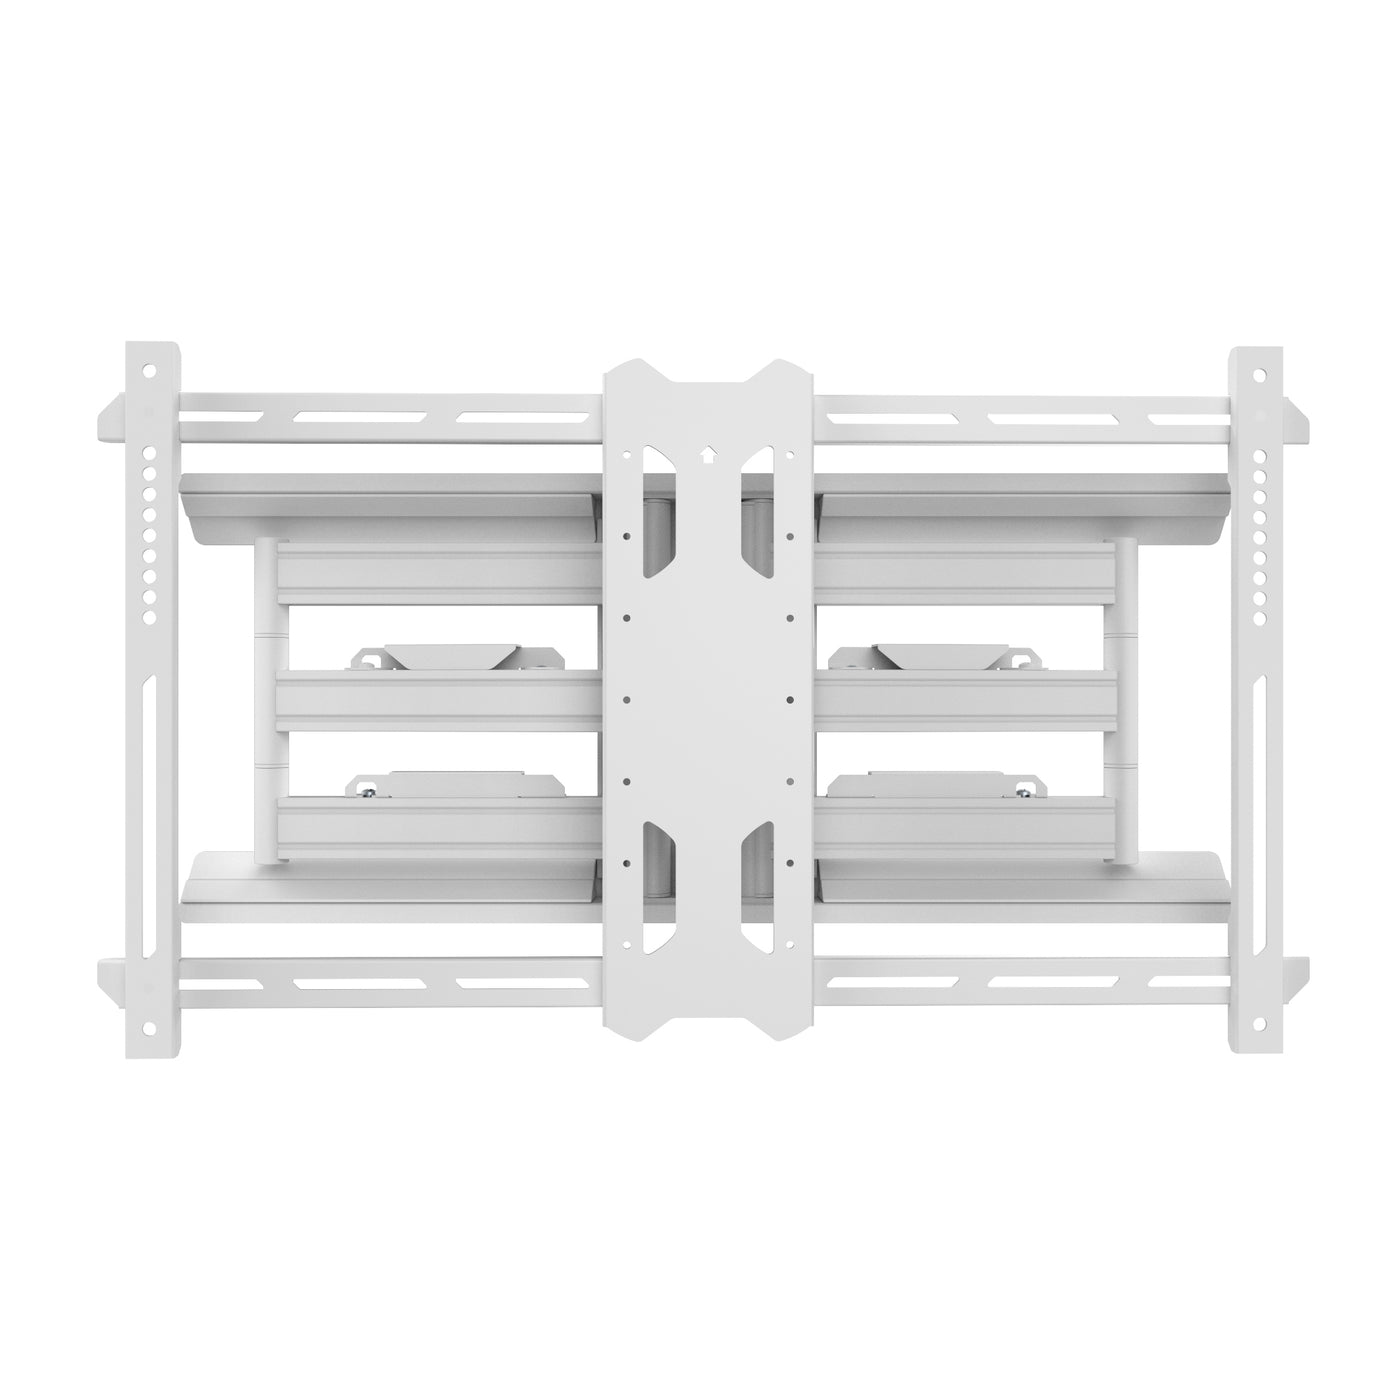 Full Motion TV Wall Mount with 24" of Extension for 39" to 80" TVs - PDX680W